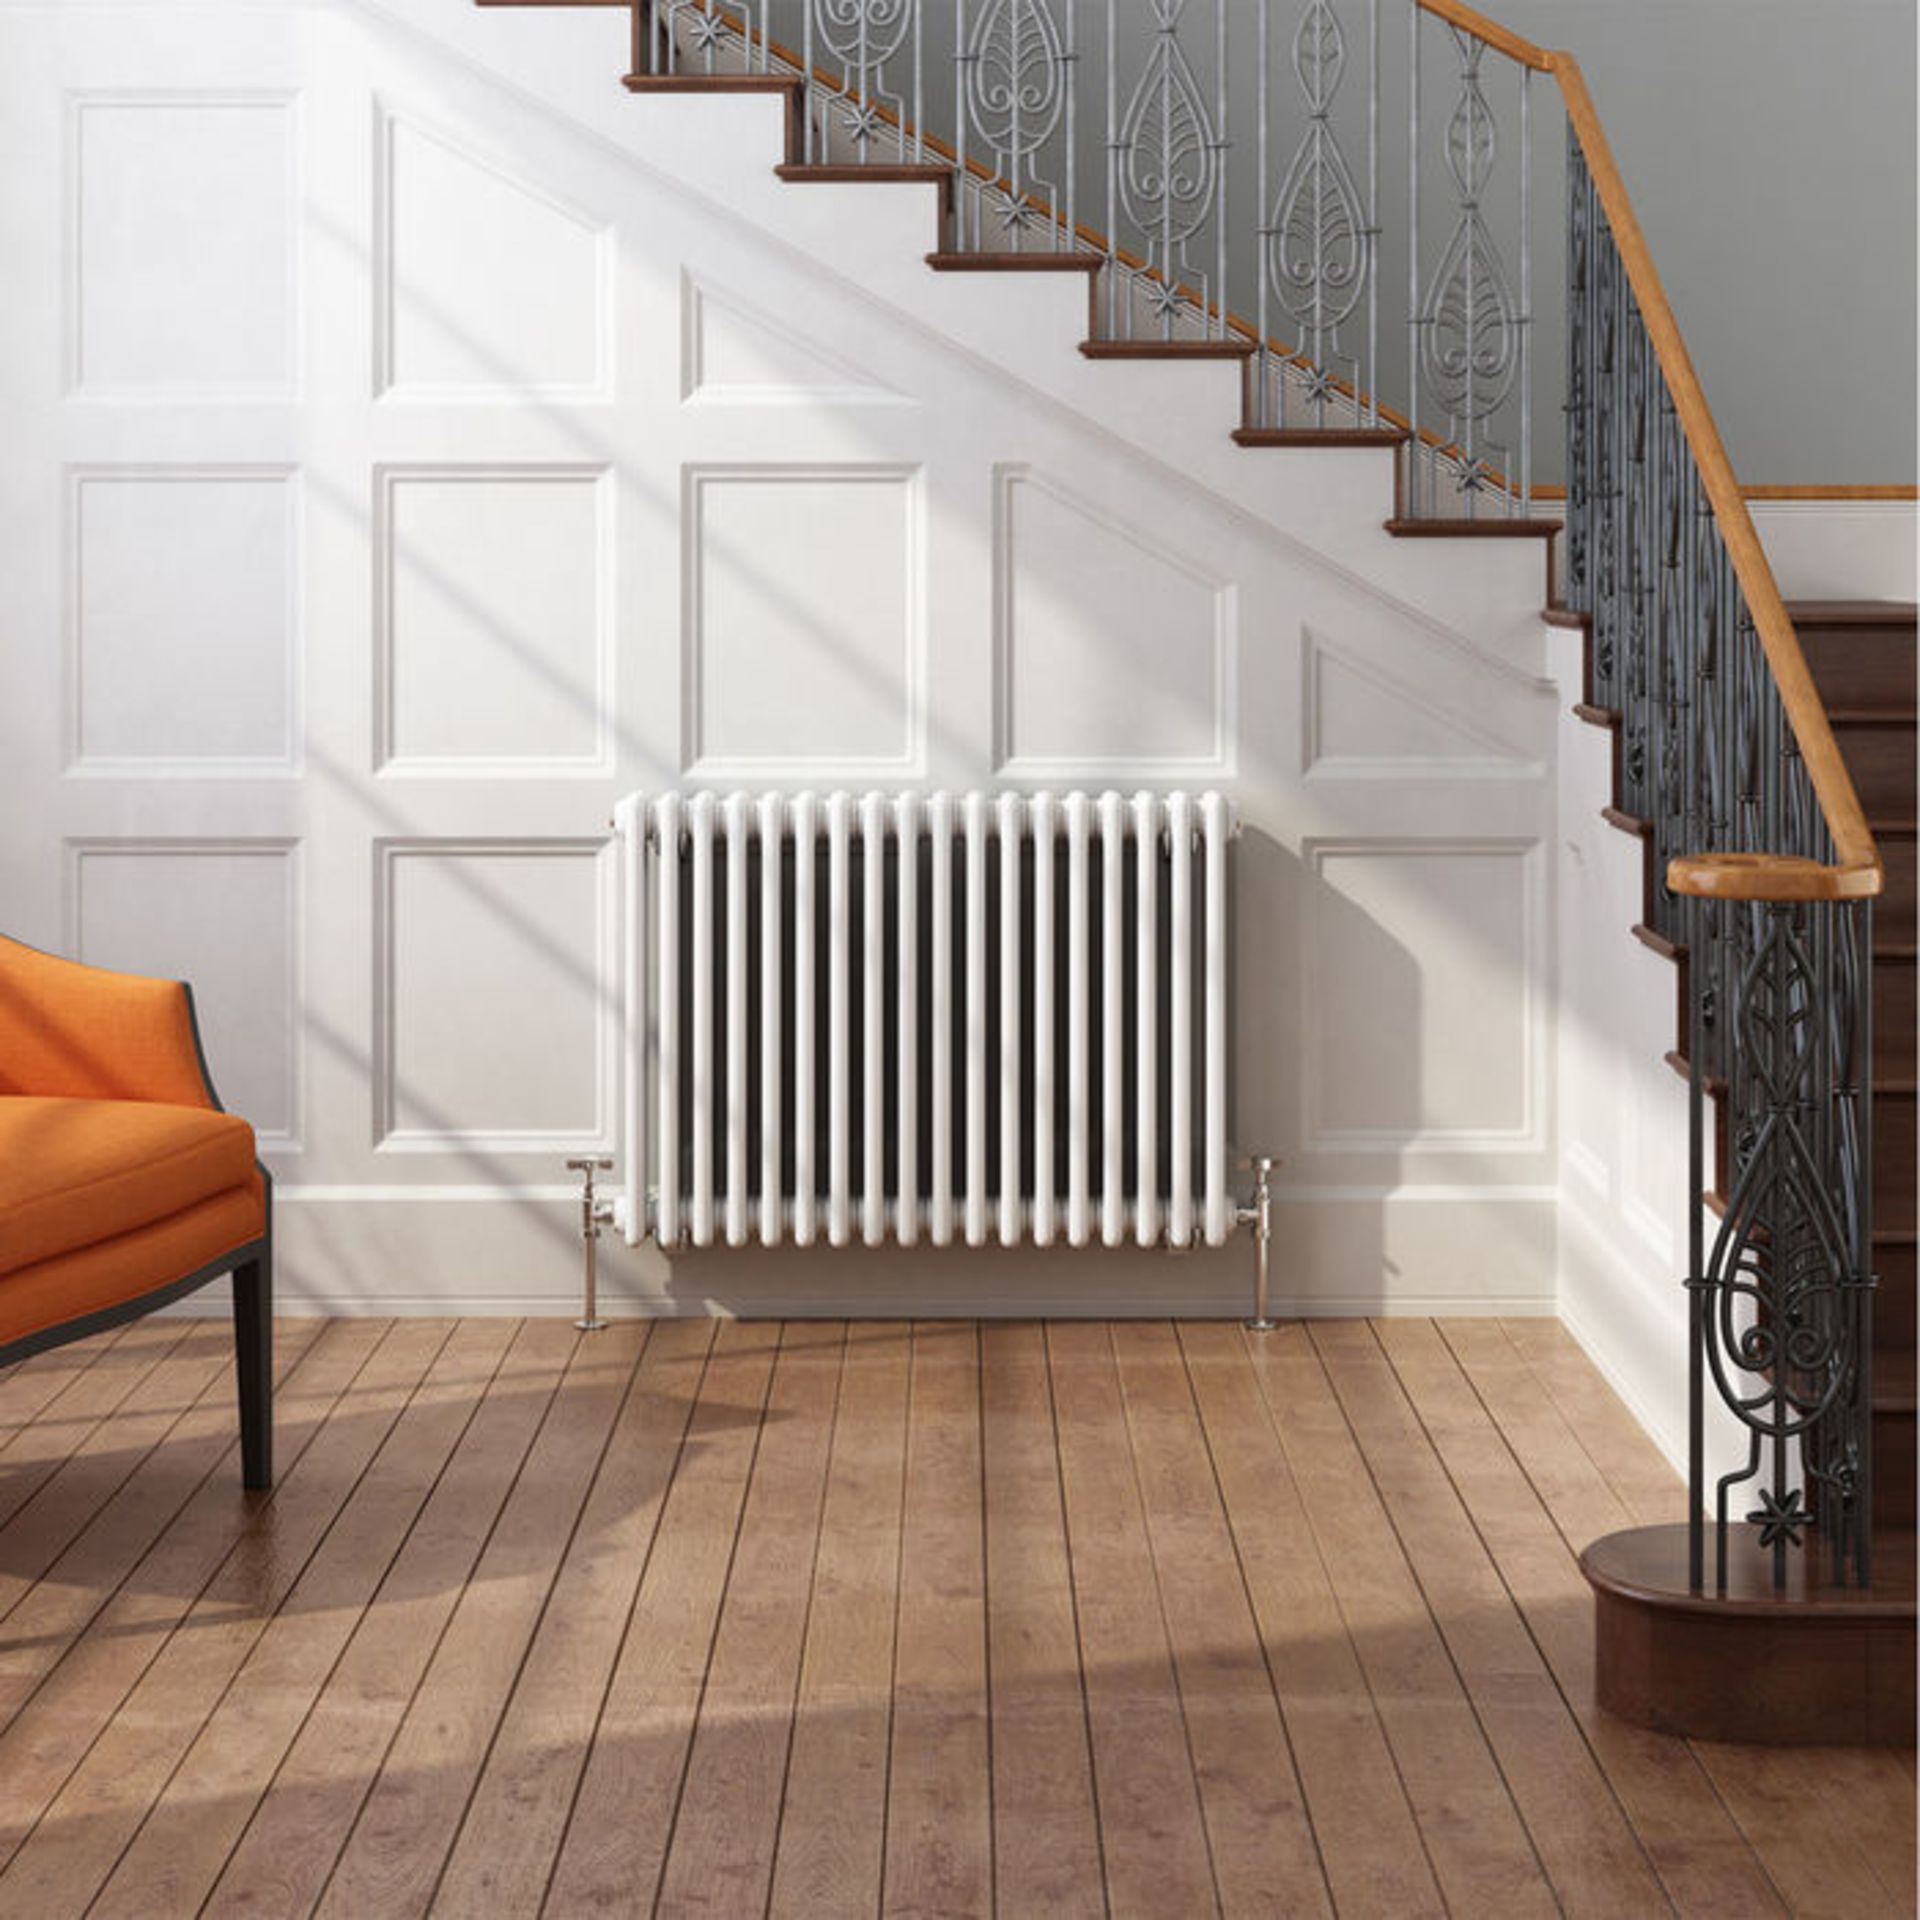 (YC41) 500x812mm White Double Panel Horizontal Colosseum Traditional Radiator. RRP £469.99. Made - Image 2 of 5